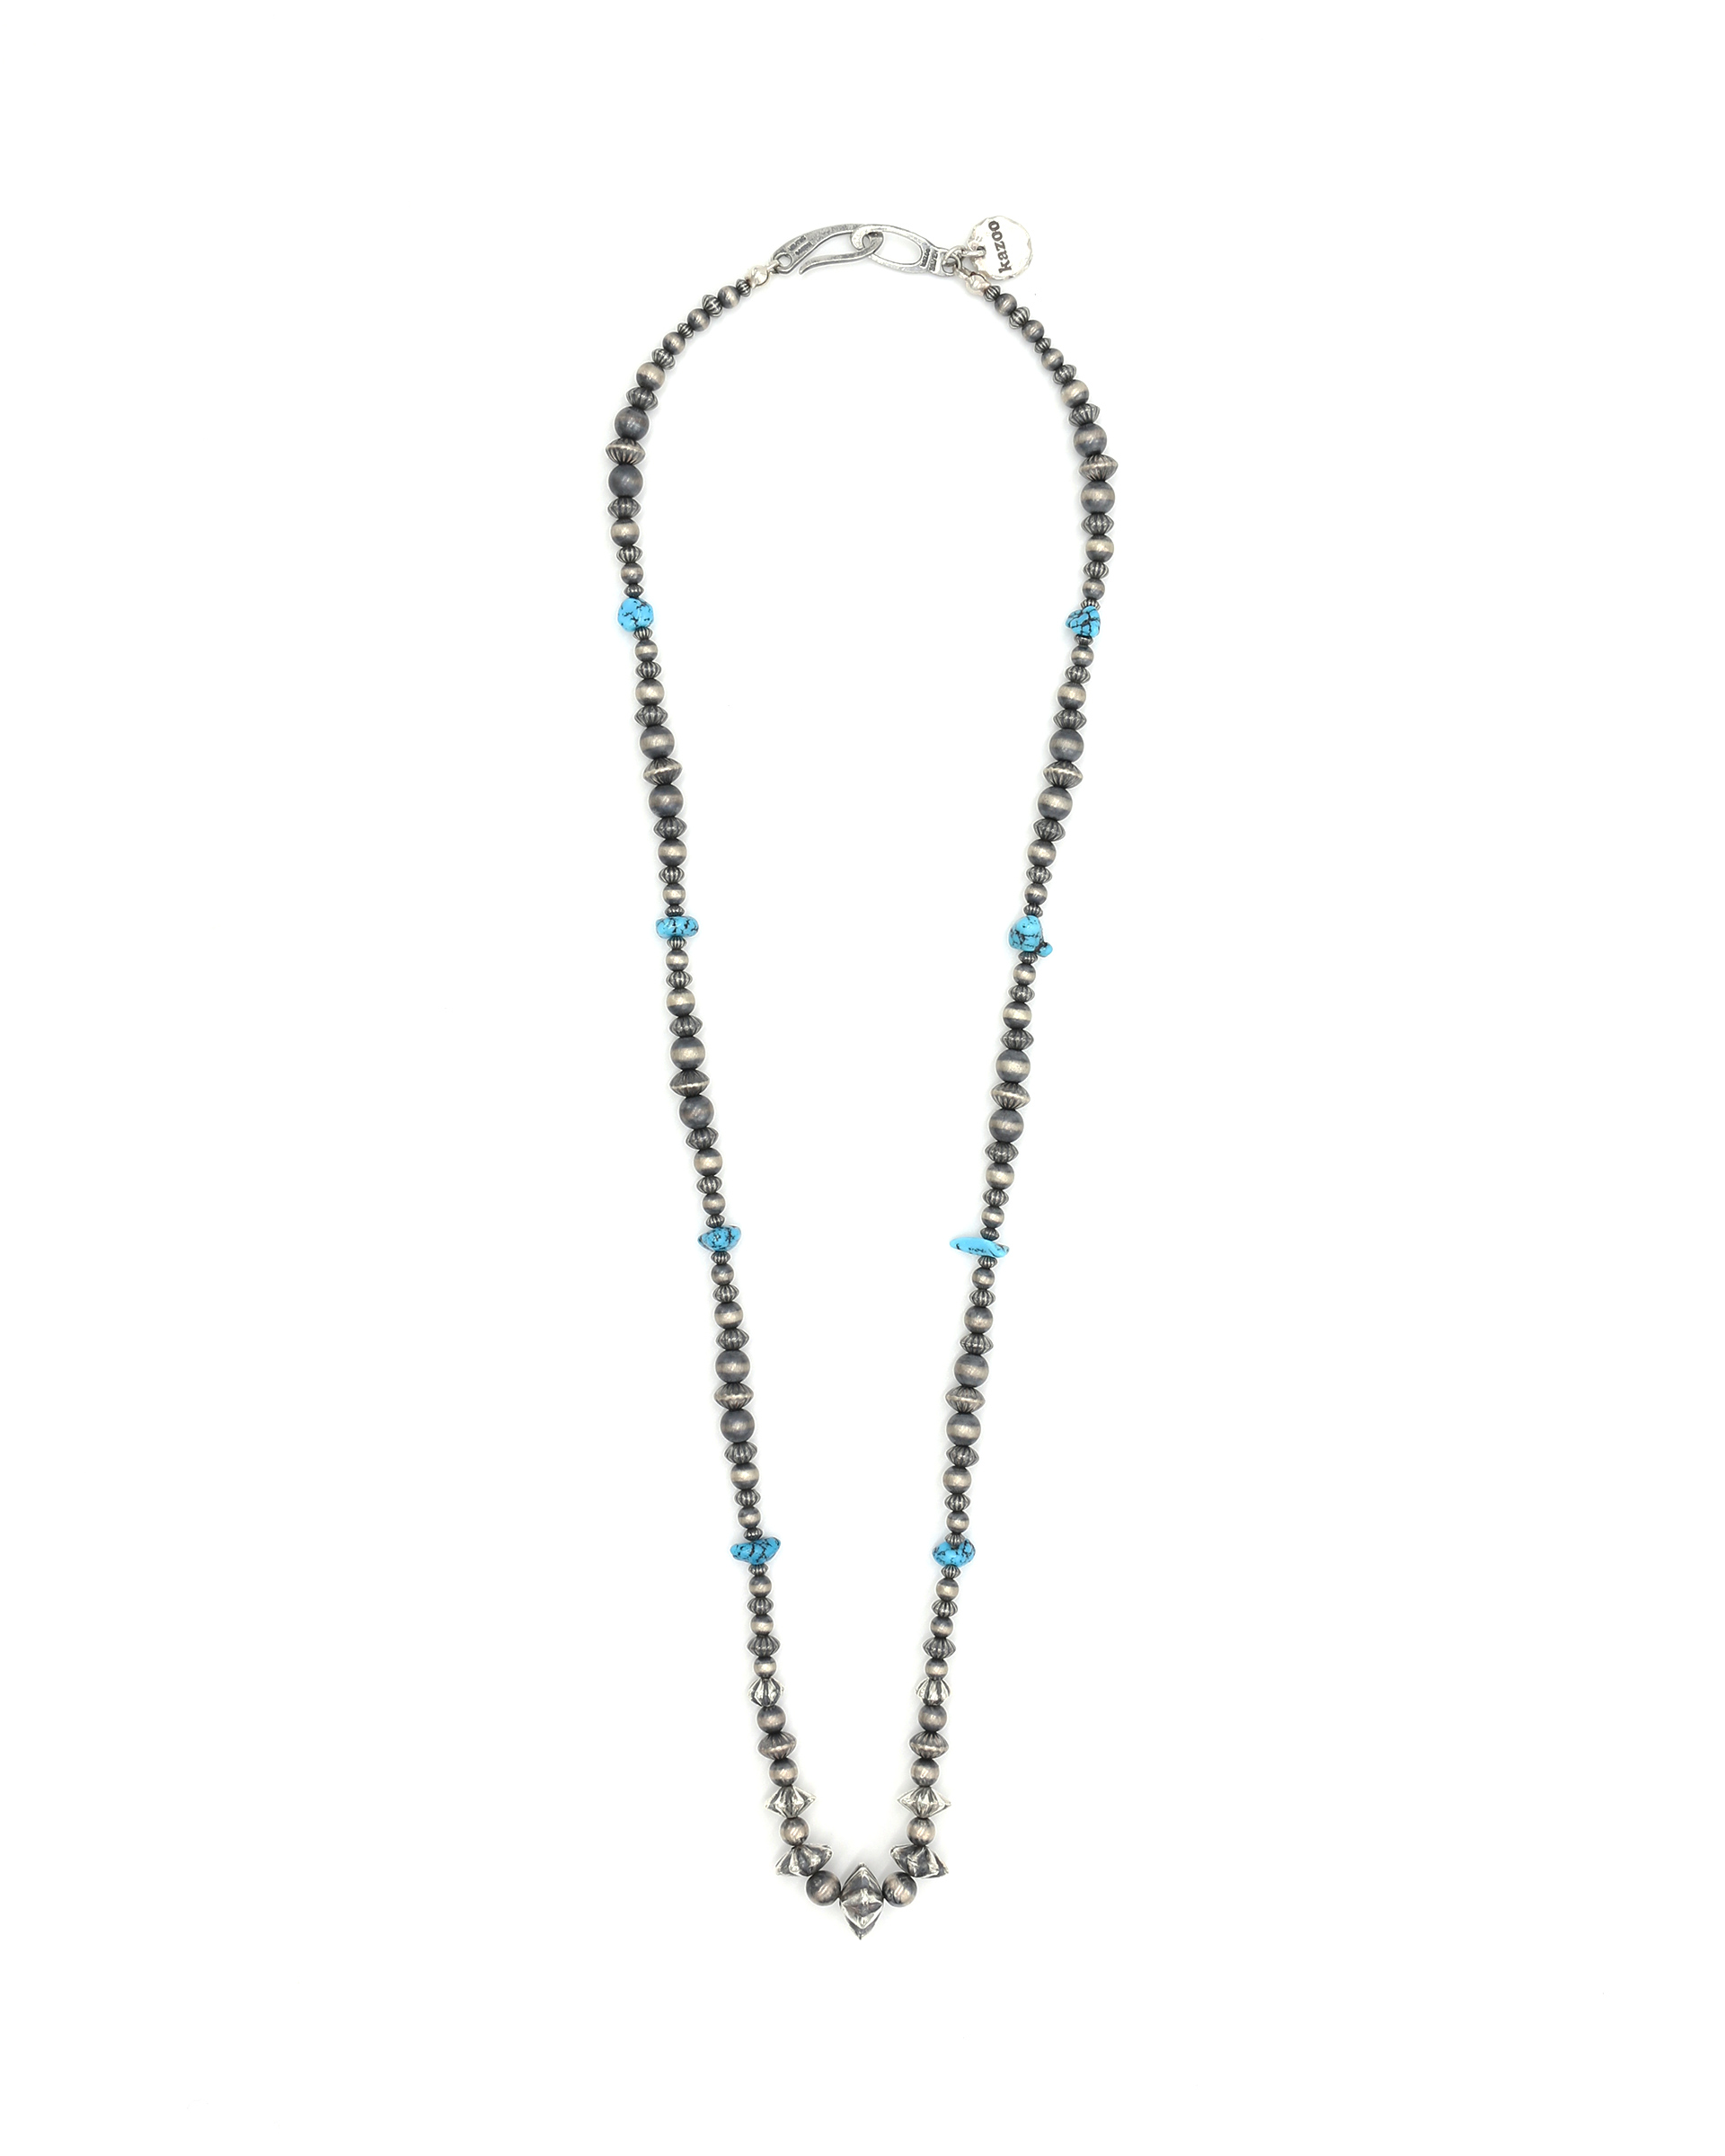 SILVER & TURQUOISE BEADS NECKLACE - TURQUOISE RIVER